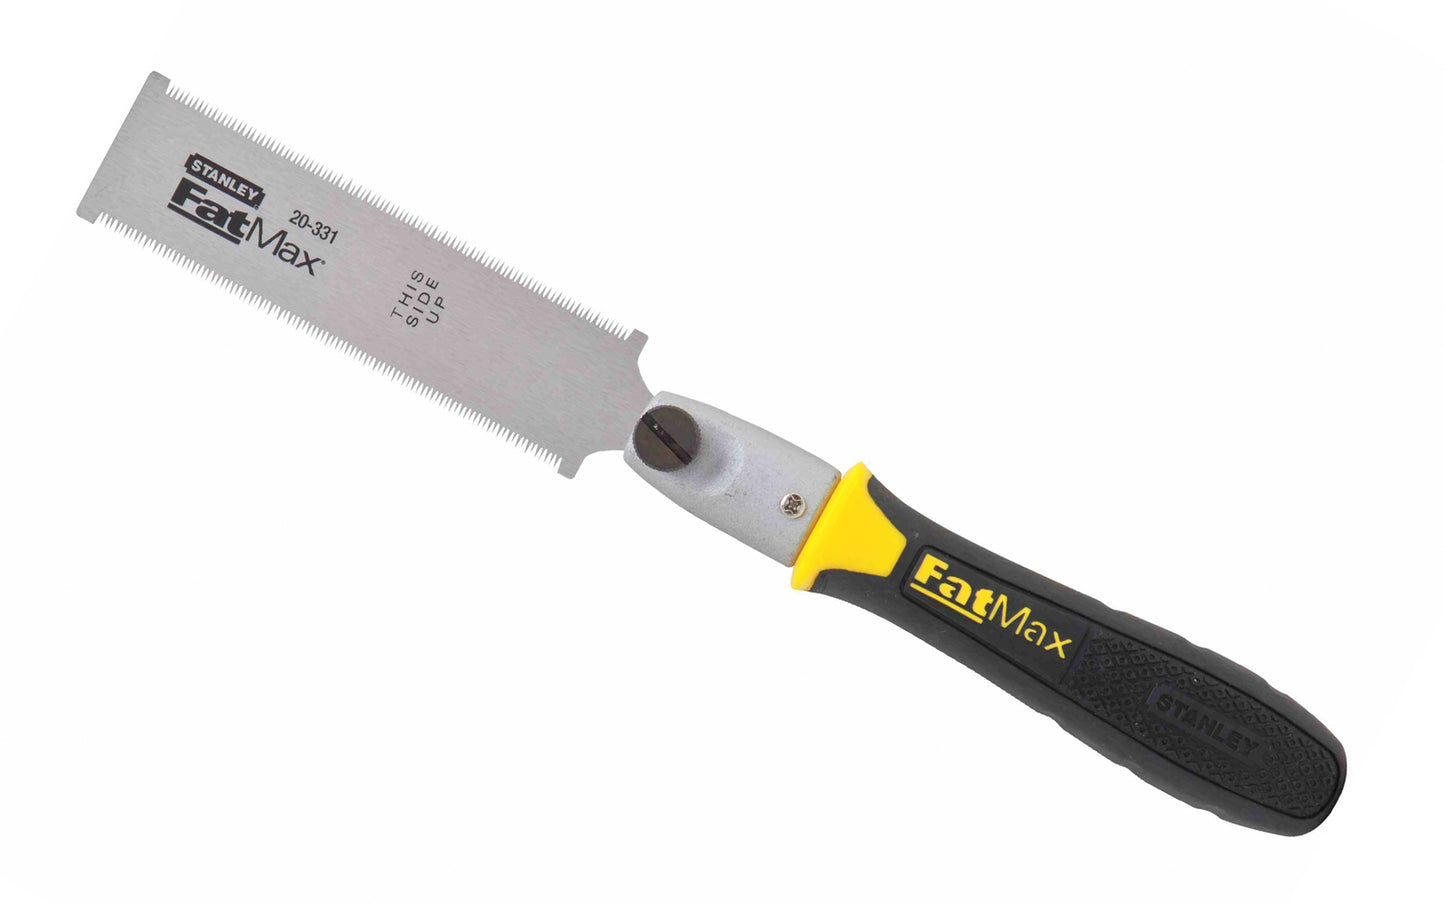 Stanley 4-3/4" Fatmax Flushcut Pull Saw ~ 20-331 - 23 TPI ~ For flush cutting dowels & detailed woodwork ~ Great for trimming through tenon or lap joints